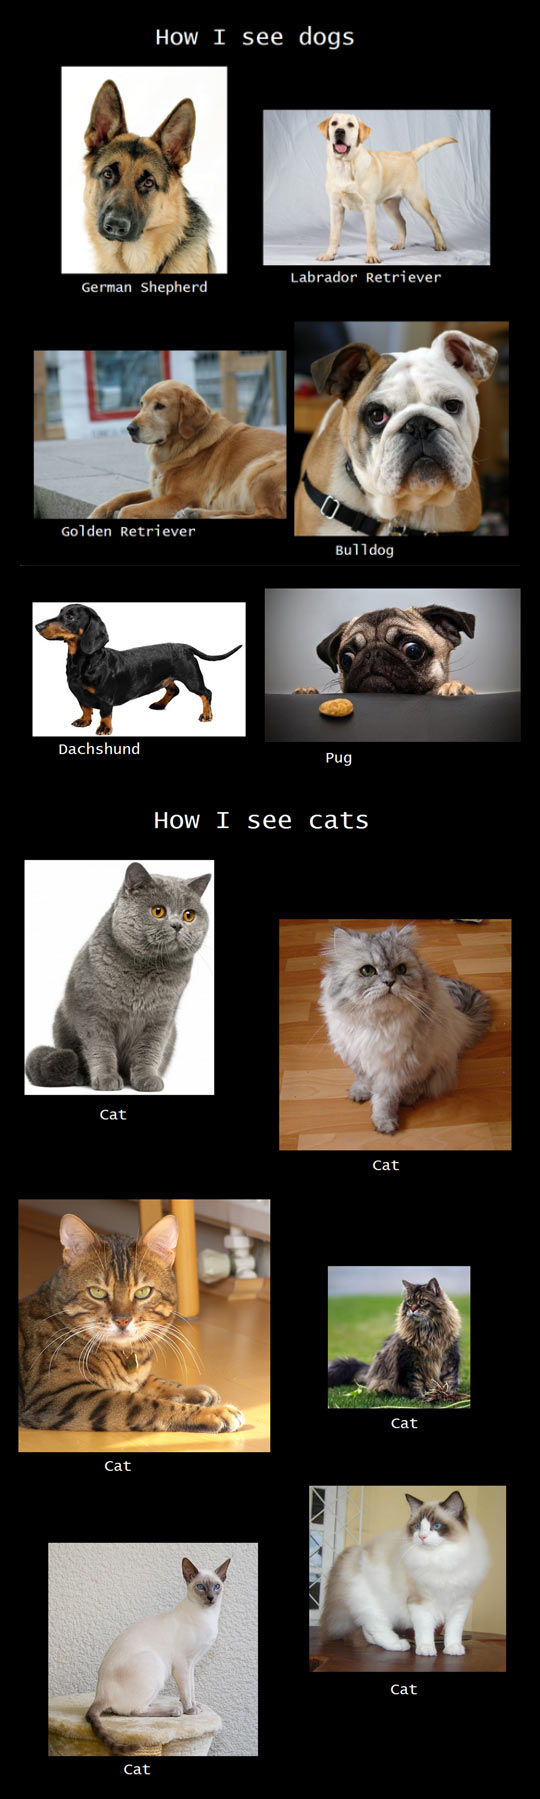 How I see dogs vs. how I see cats.